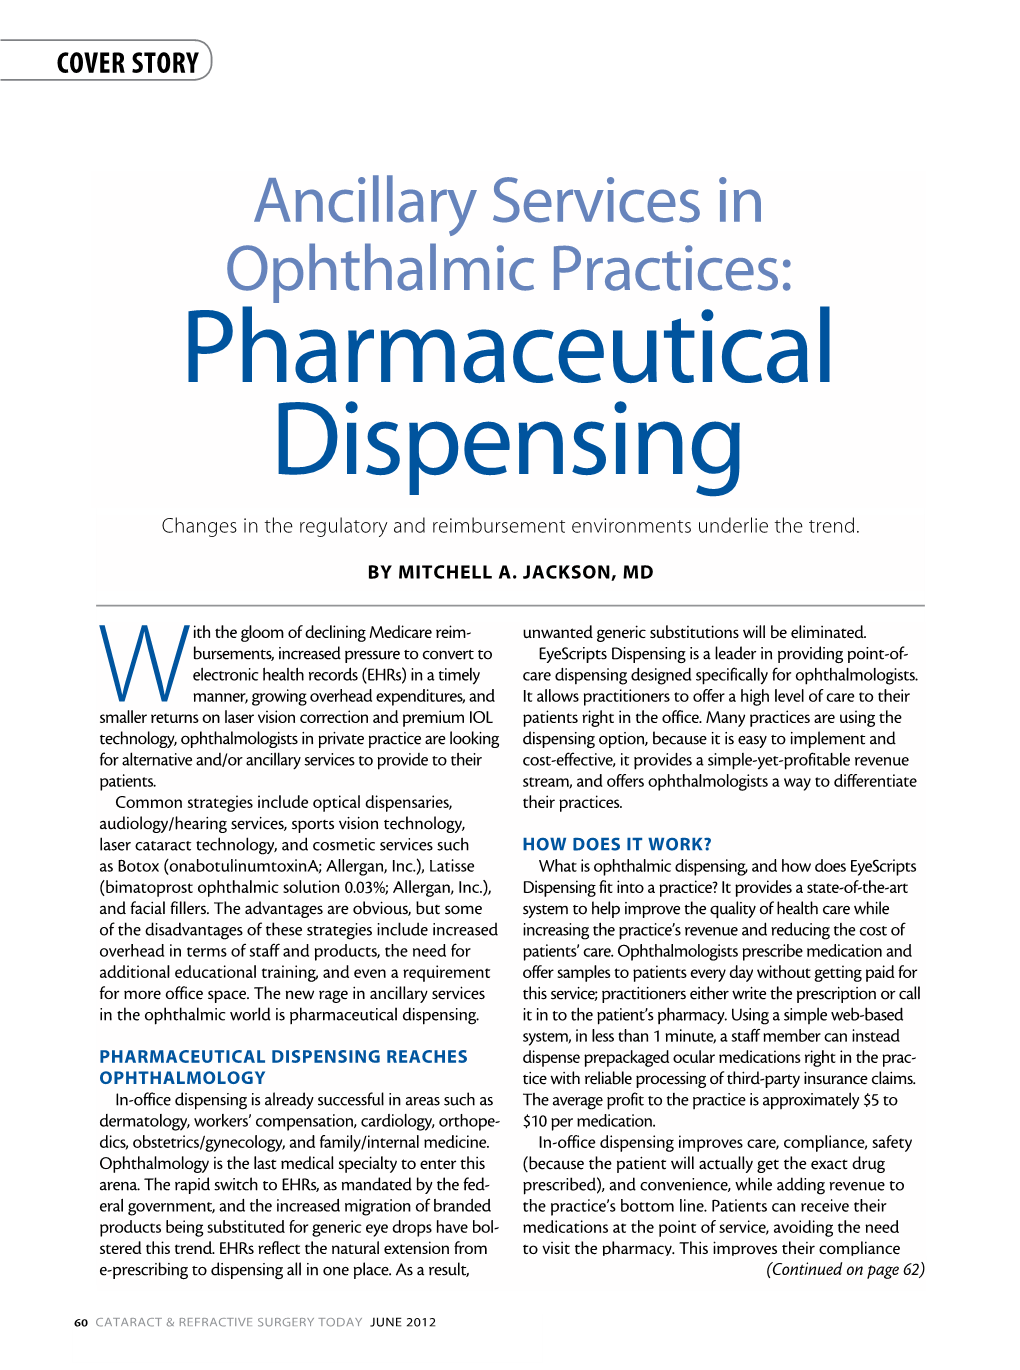 Pharmaceutical Dispensing Changes in the Regulatory and Reimbursement Environments Underlie the Trend